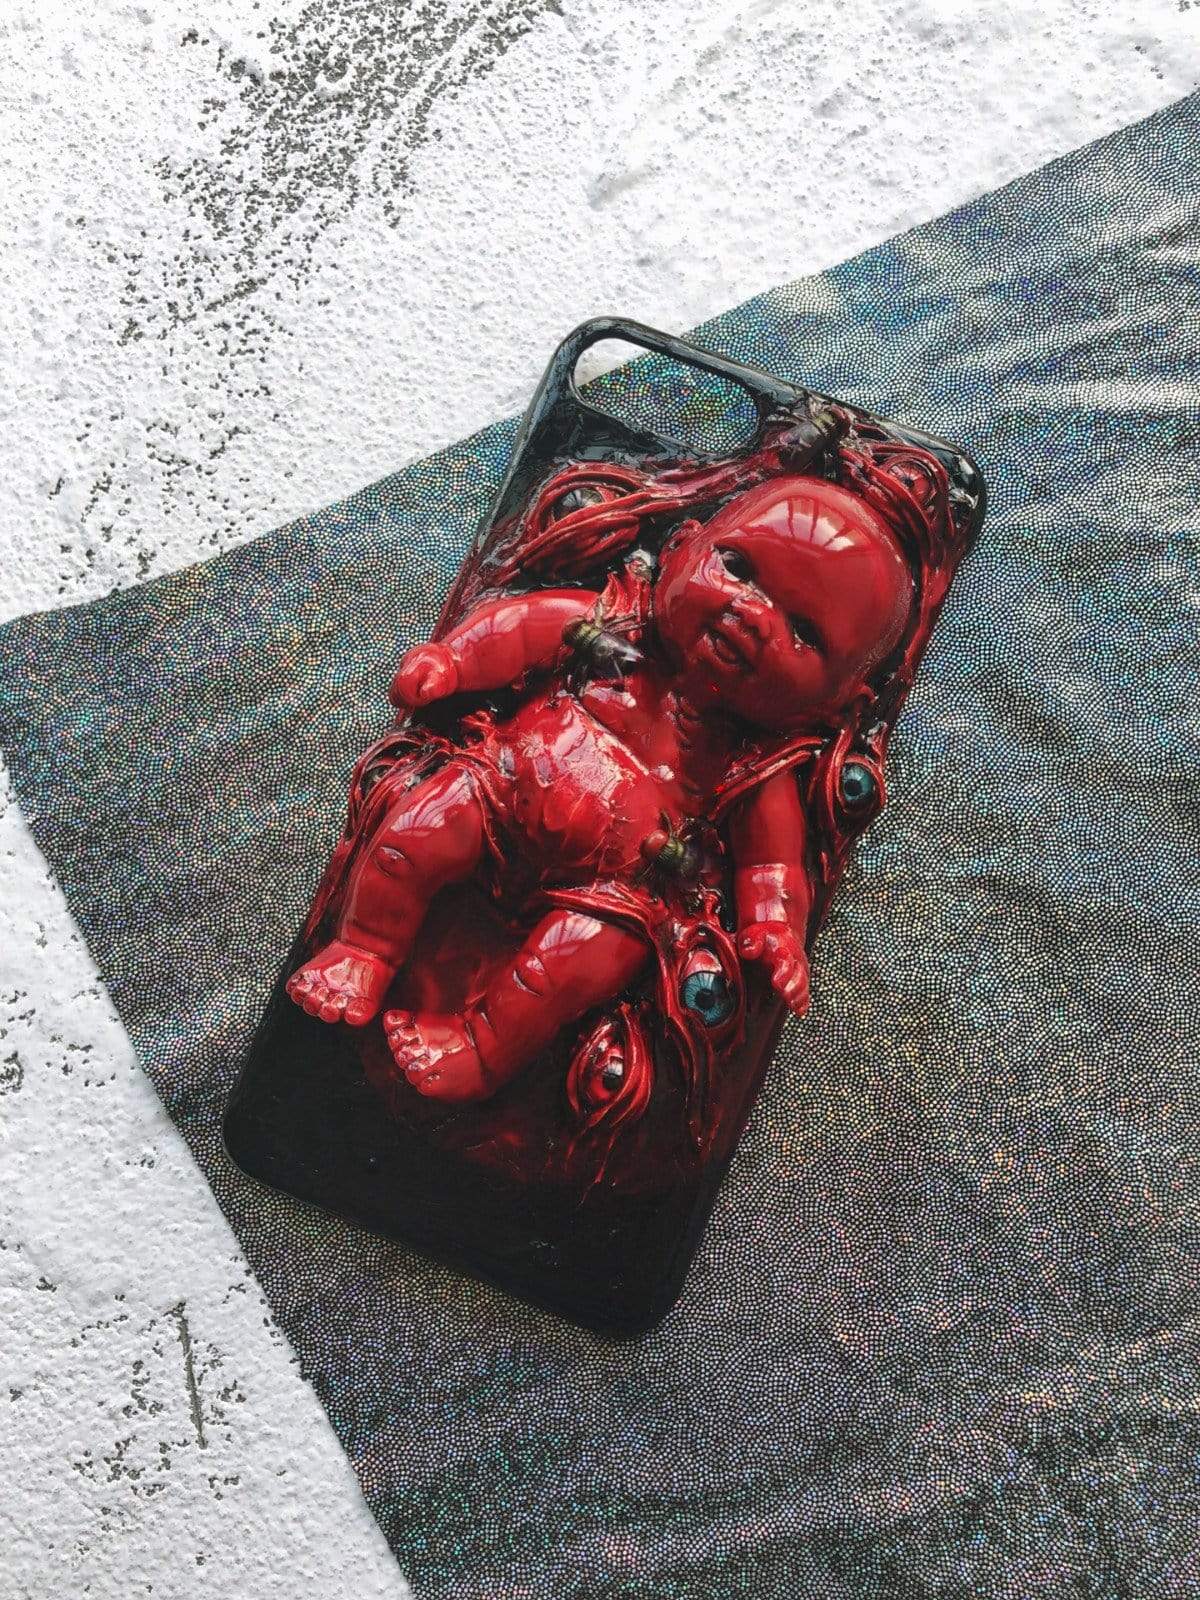 The Blood Baby Handmade Designer iPhone Case For iPhone SE 11 Pro Max X XS Max XR 7 8 Plus - techypopcom